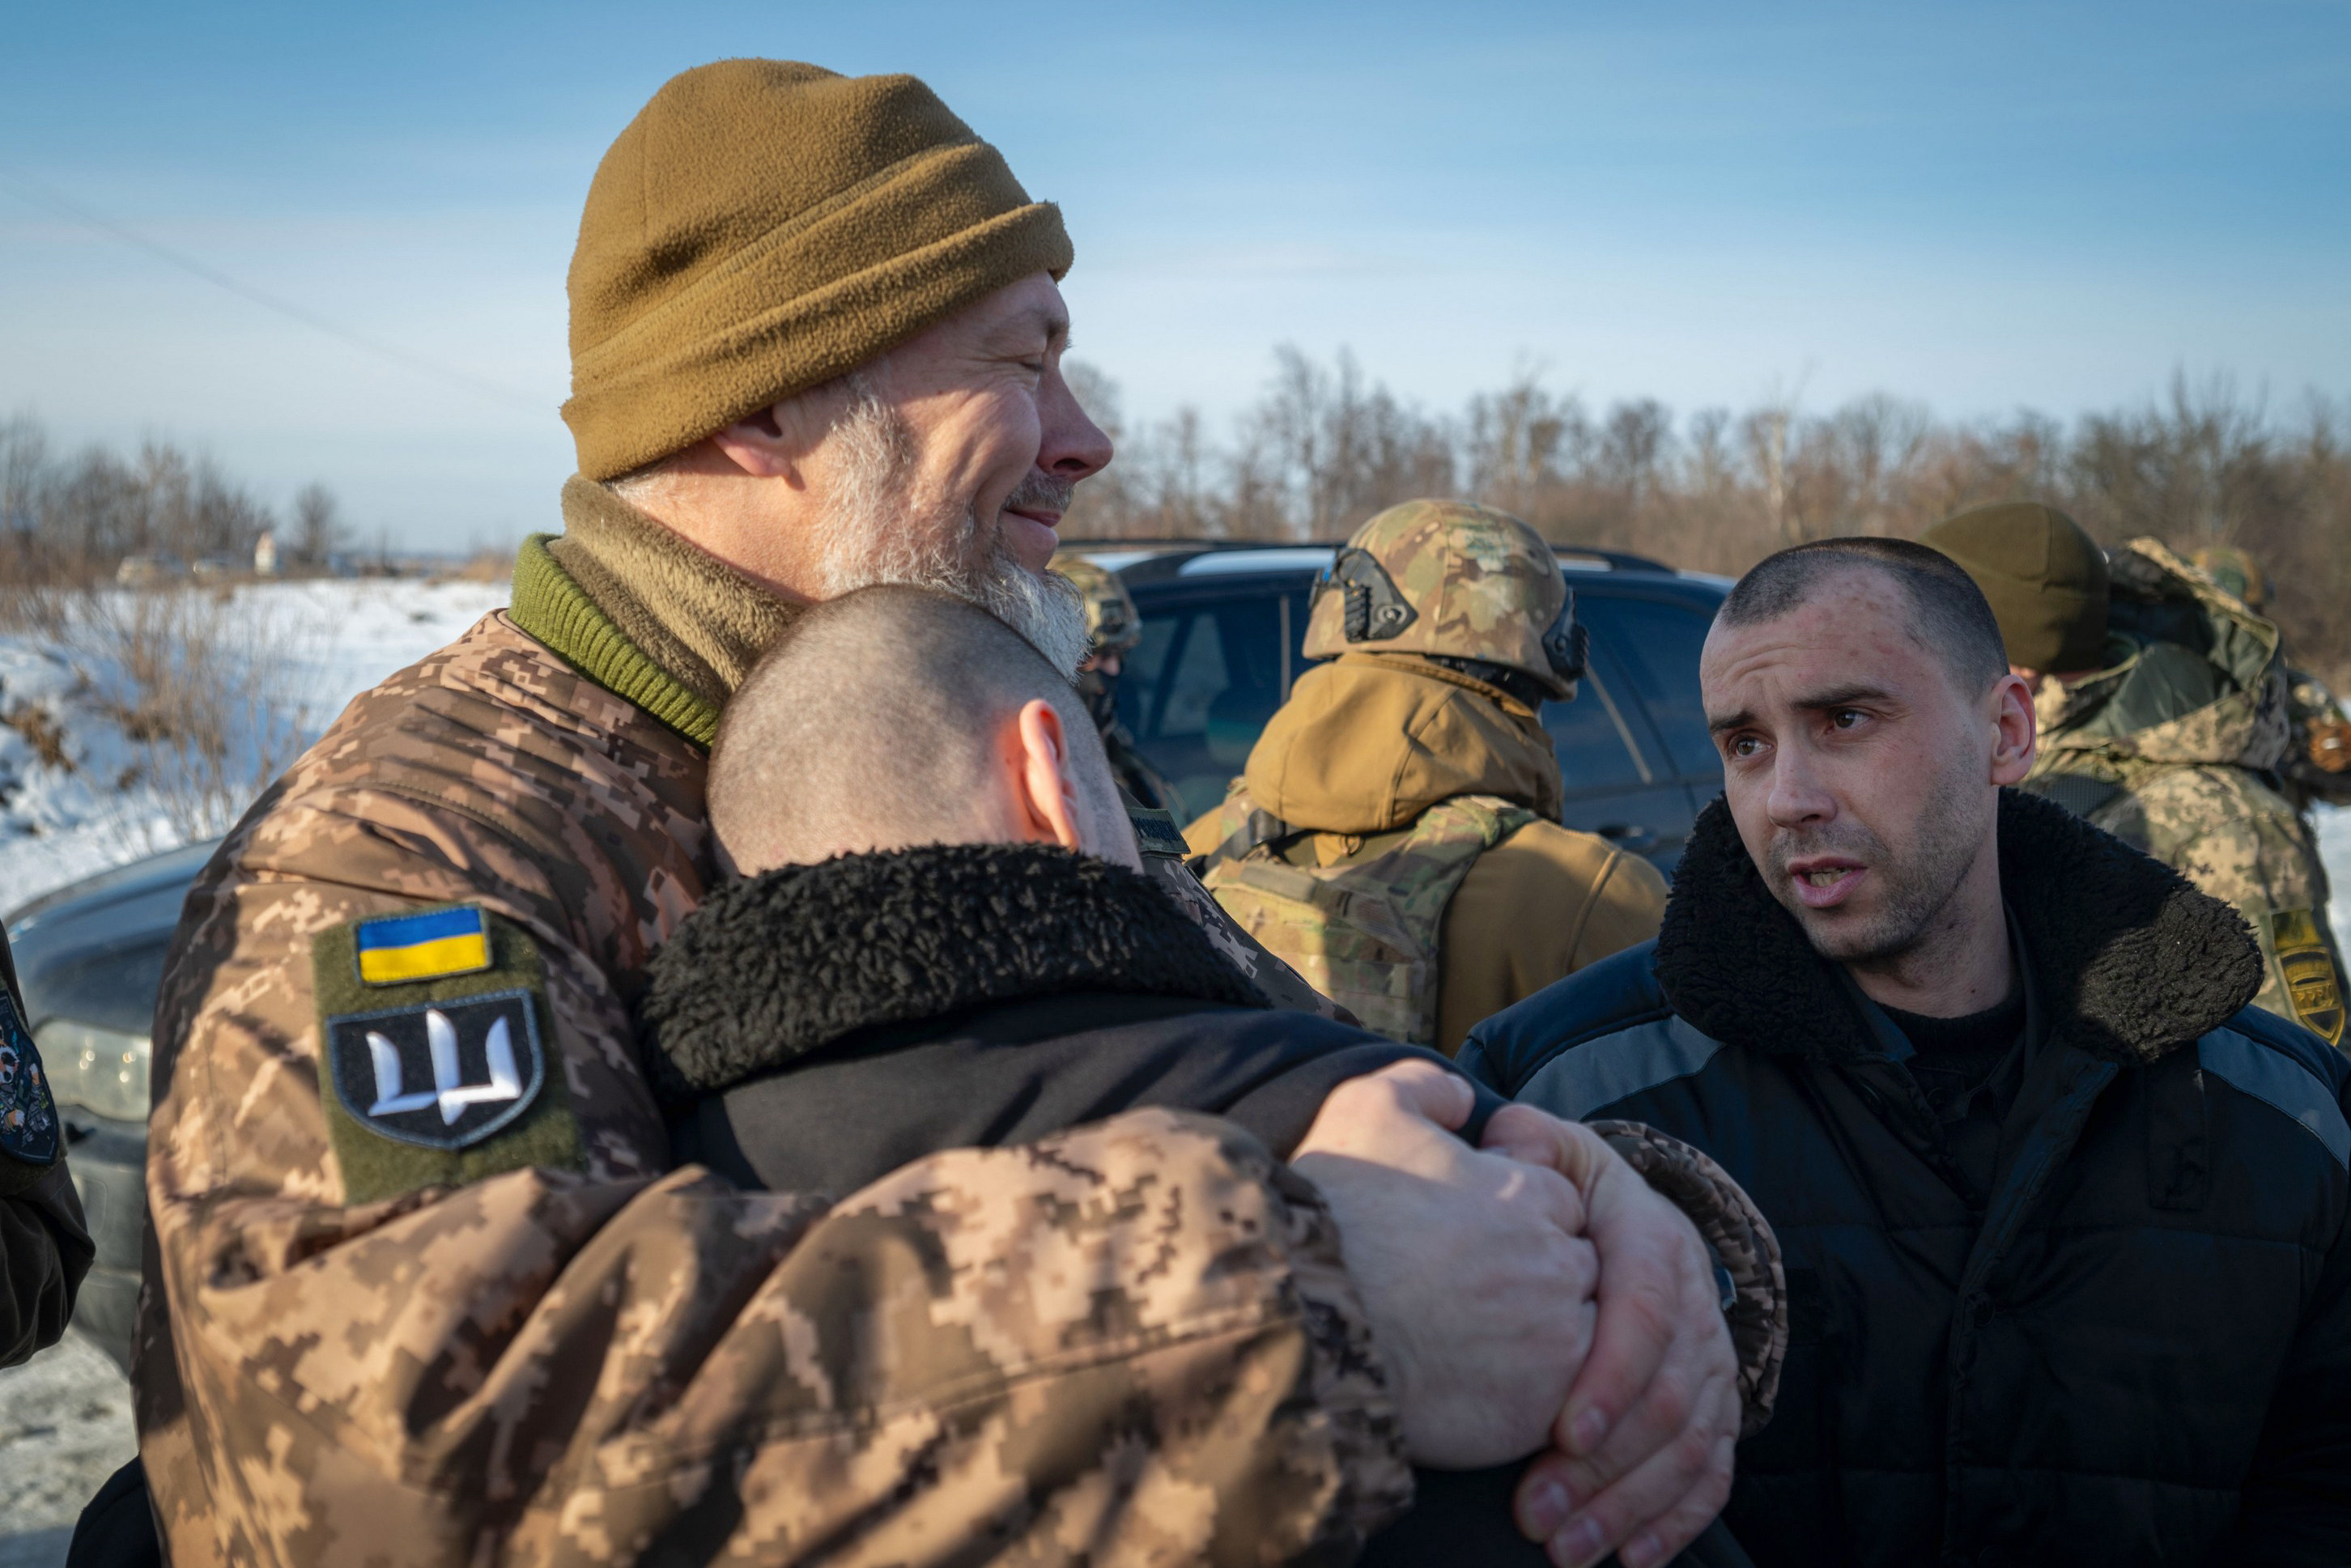 Ukrainian prisoners of war react after a prisoner exchange at an undisclosed location. Russia and Ukraine exchanged about 200 prisoners of war each, the countries said on Wednesday. Photo: X/Volodymyr Zelensky via AP